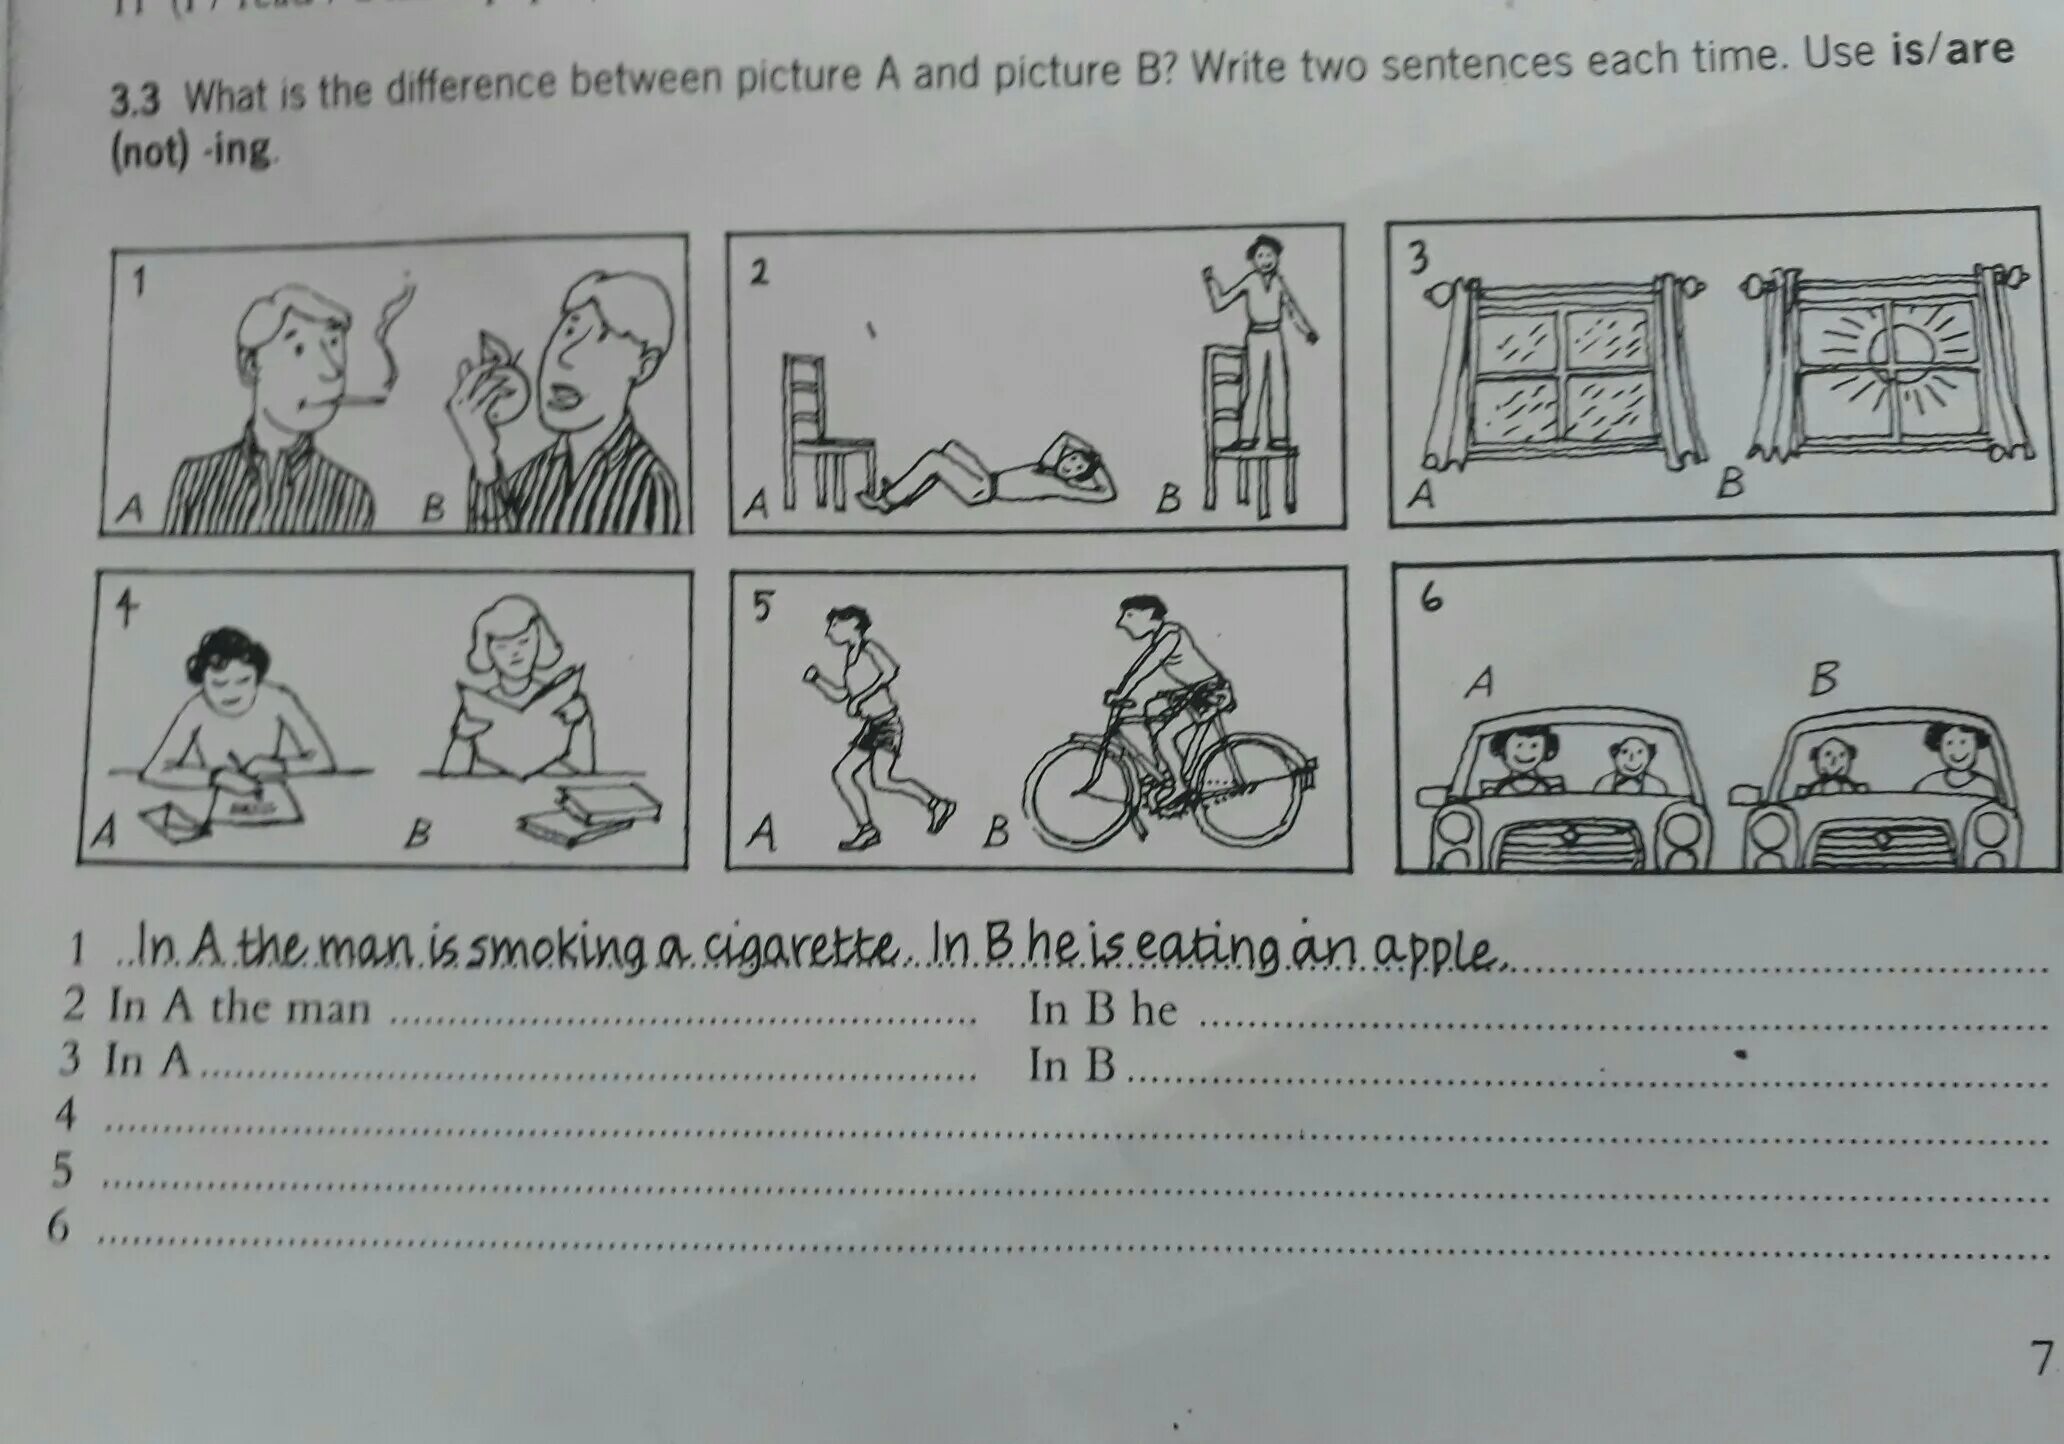 Write sentences for each picture